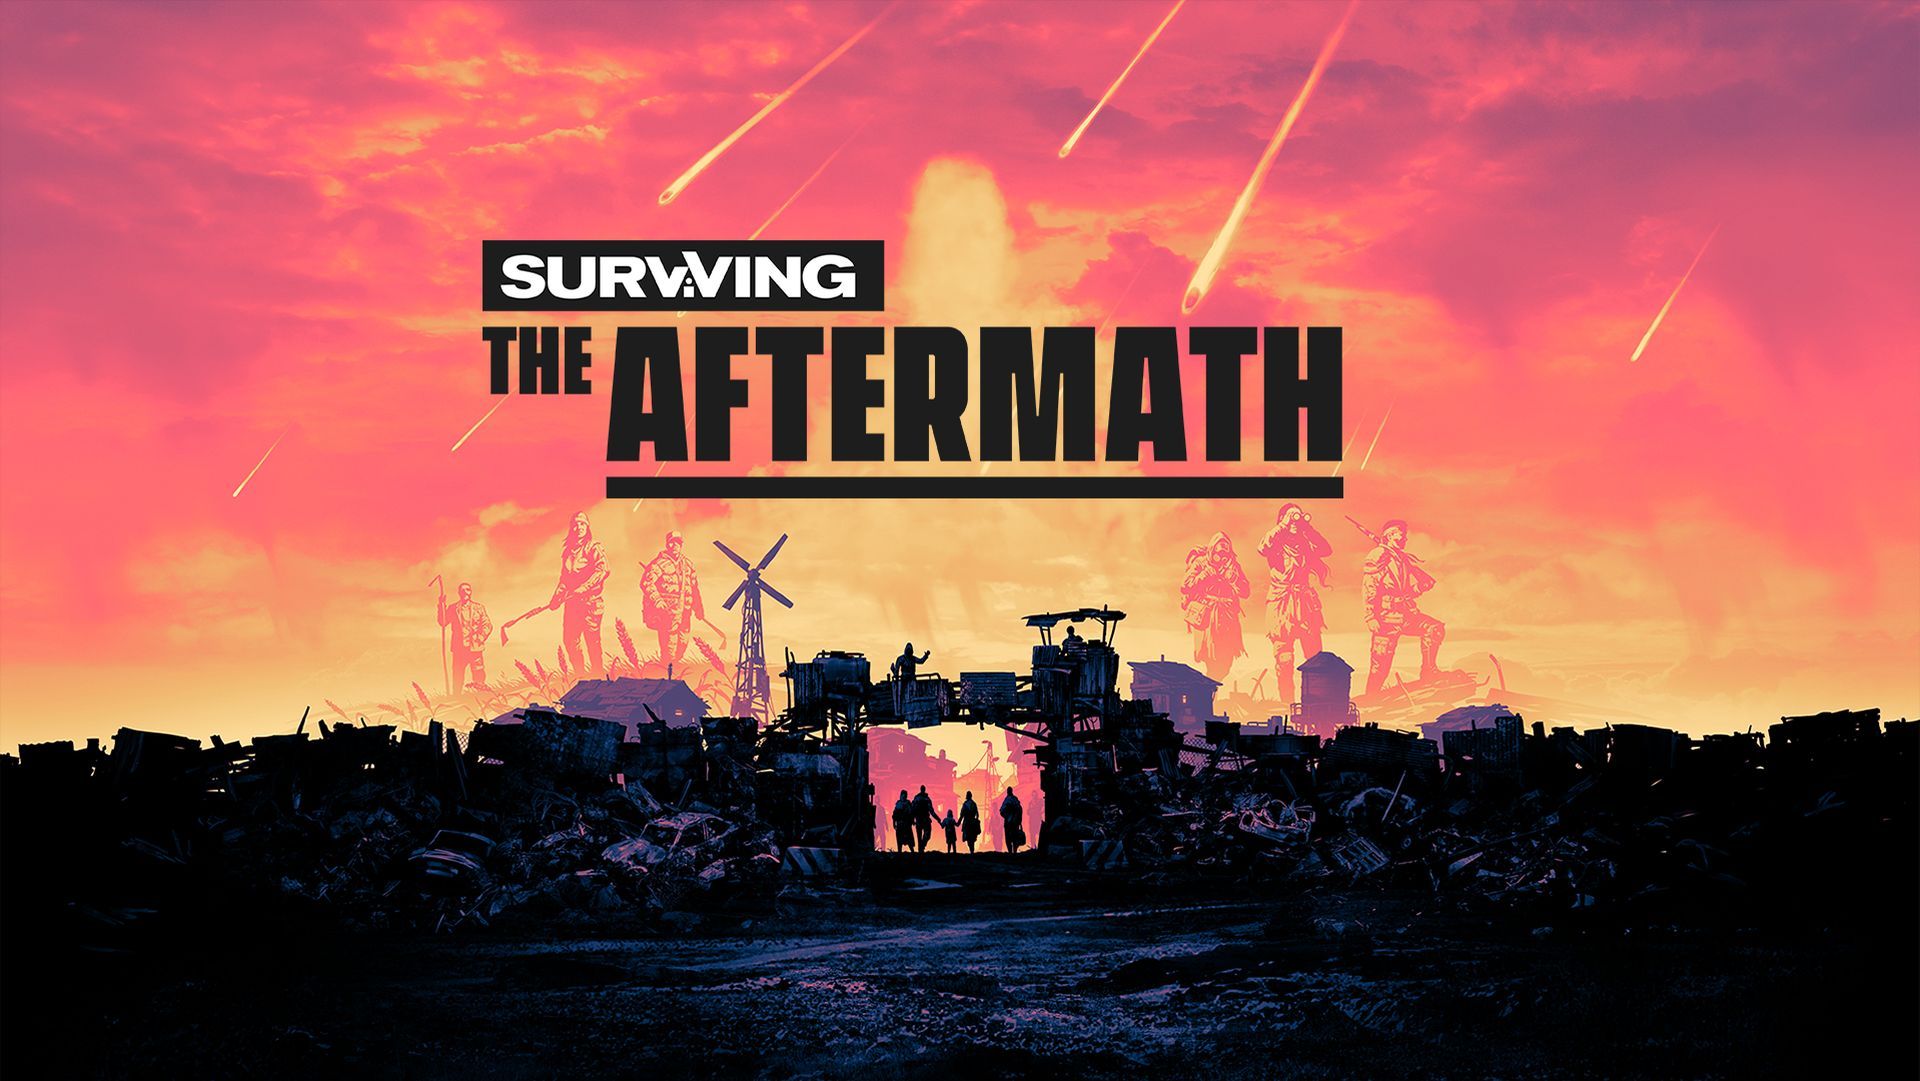 Play Surviving the Aftermath on Xbox Game Preview Today